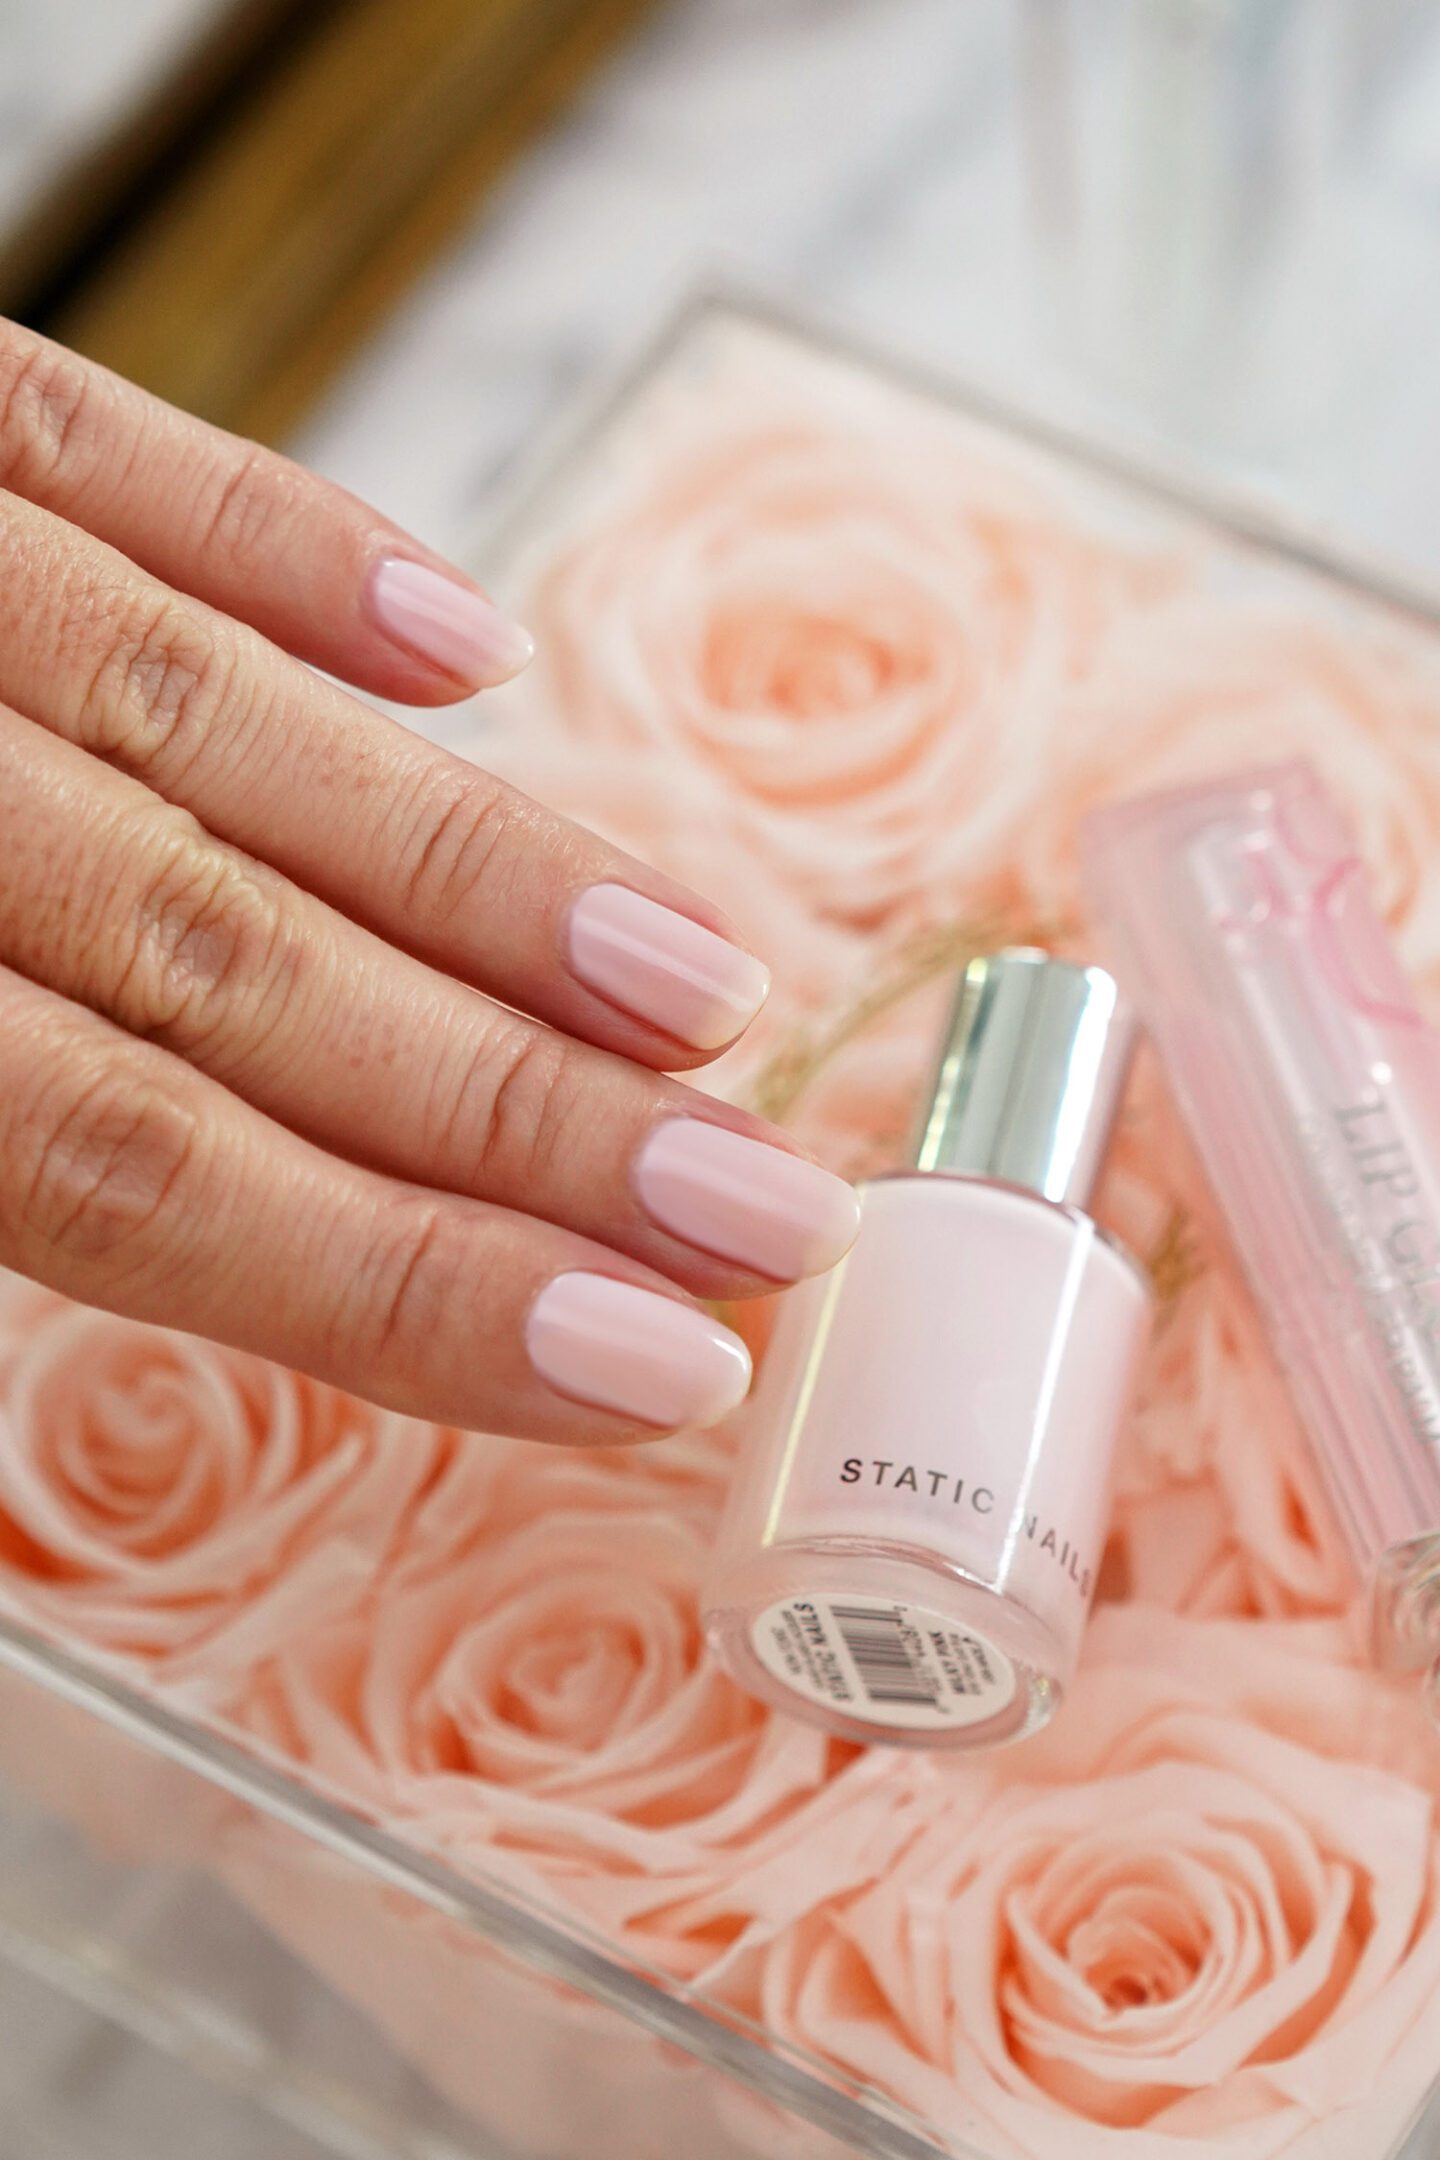 Static Nails in Milky Pink